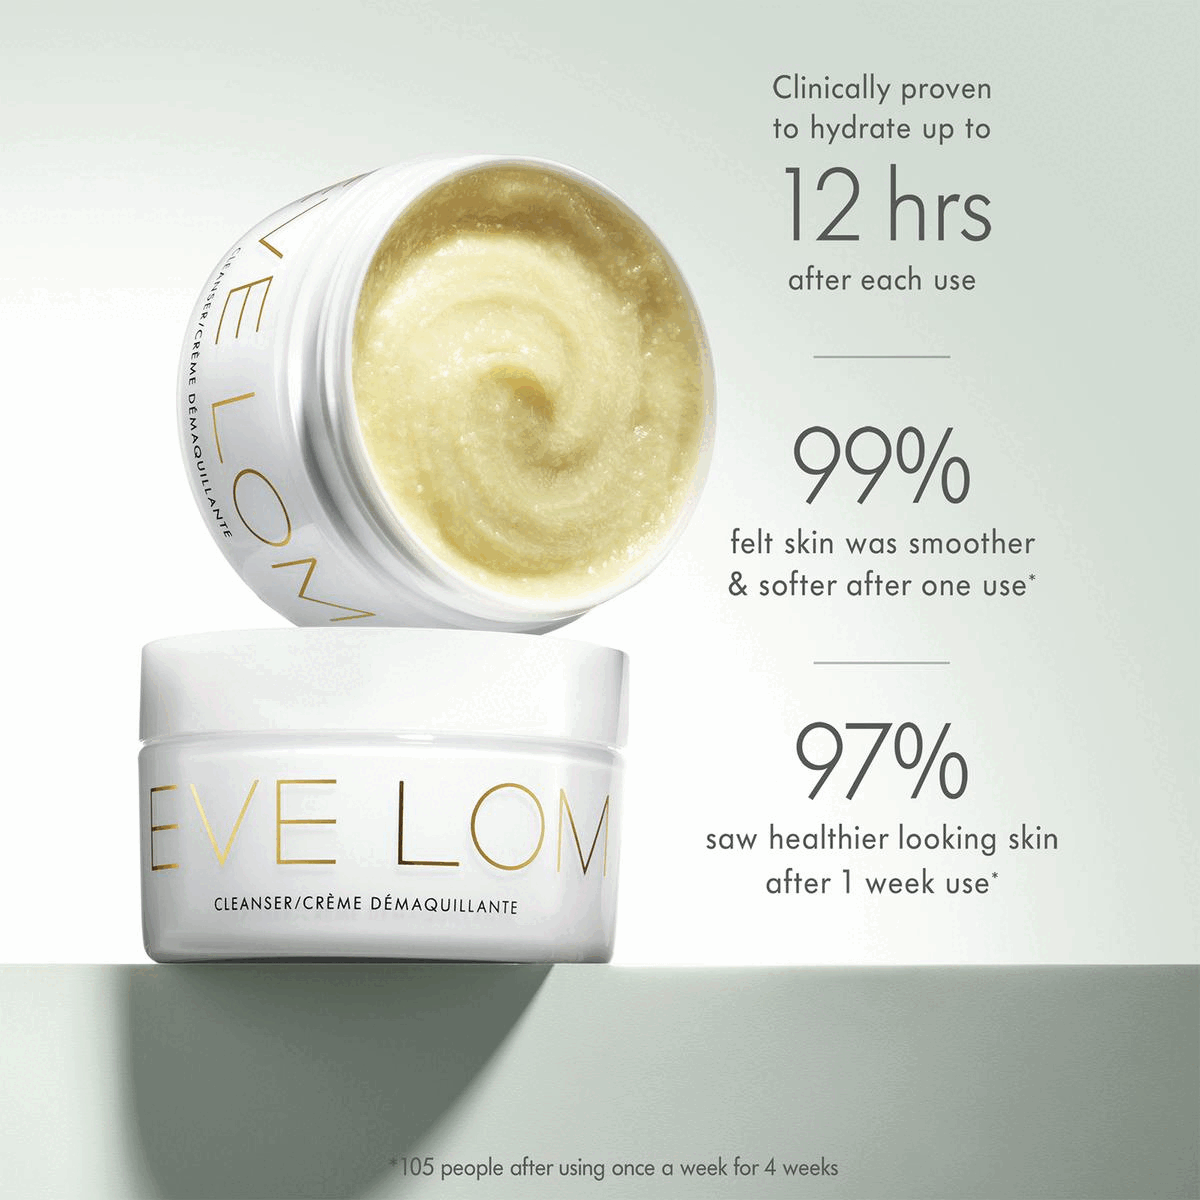 Image 1, Clinically proven to hydrate up to 12 hrs after each use, 99% felt skin was smoother & softer after one use*, 97% saw healthier looking skin after 1 week use* *105 people after using once a week for 4 weeks Image 2, CREAM A cream-to-foam cleanser effectively draws out impurities without drying skin or clogging pores. Oil A signature blend of botanical oils for a deeper cleanse. Your travel companion for easy makeup removal. GEL A gel-to-balm formula with an easy-to-use pump that delivers quick on-the-go results. BALM Our original formula deeply cleanses skin and exfoliate with our muslin cloth.